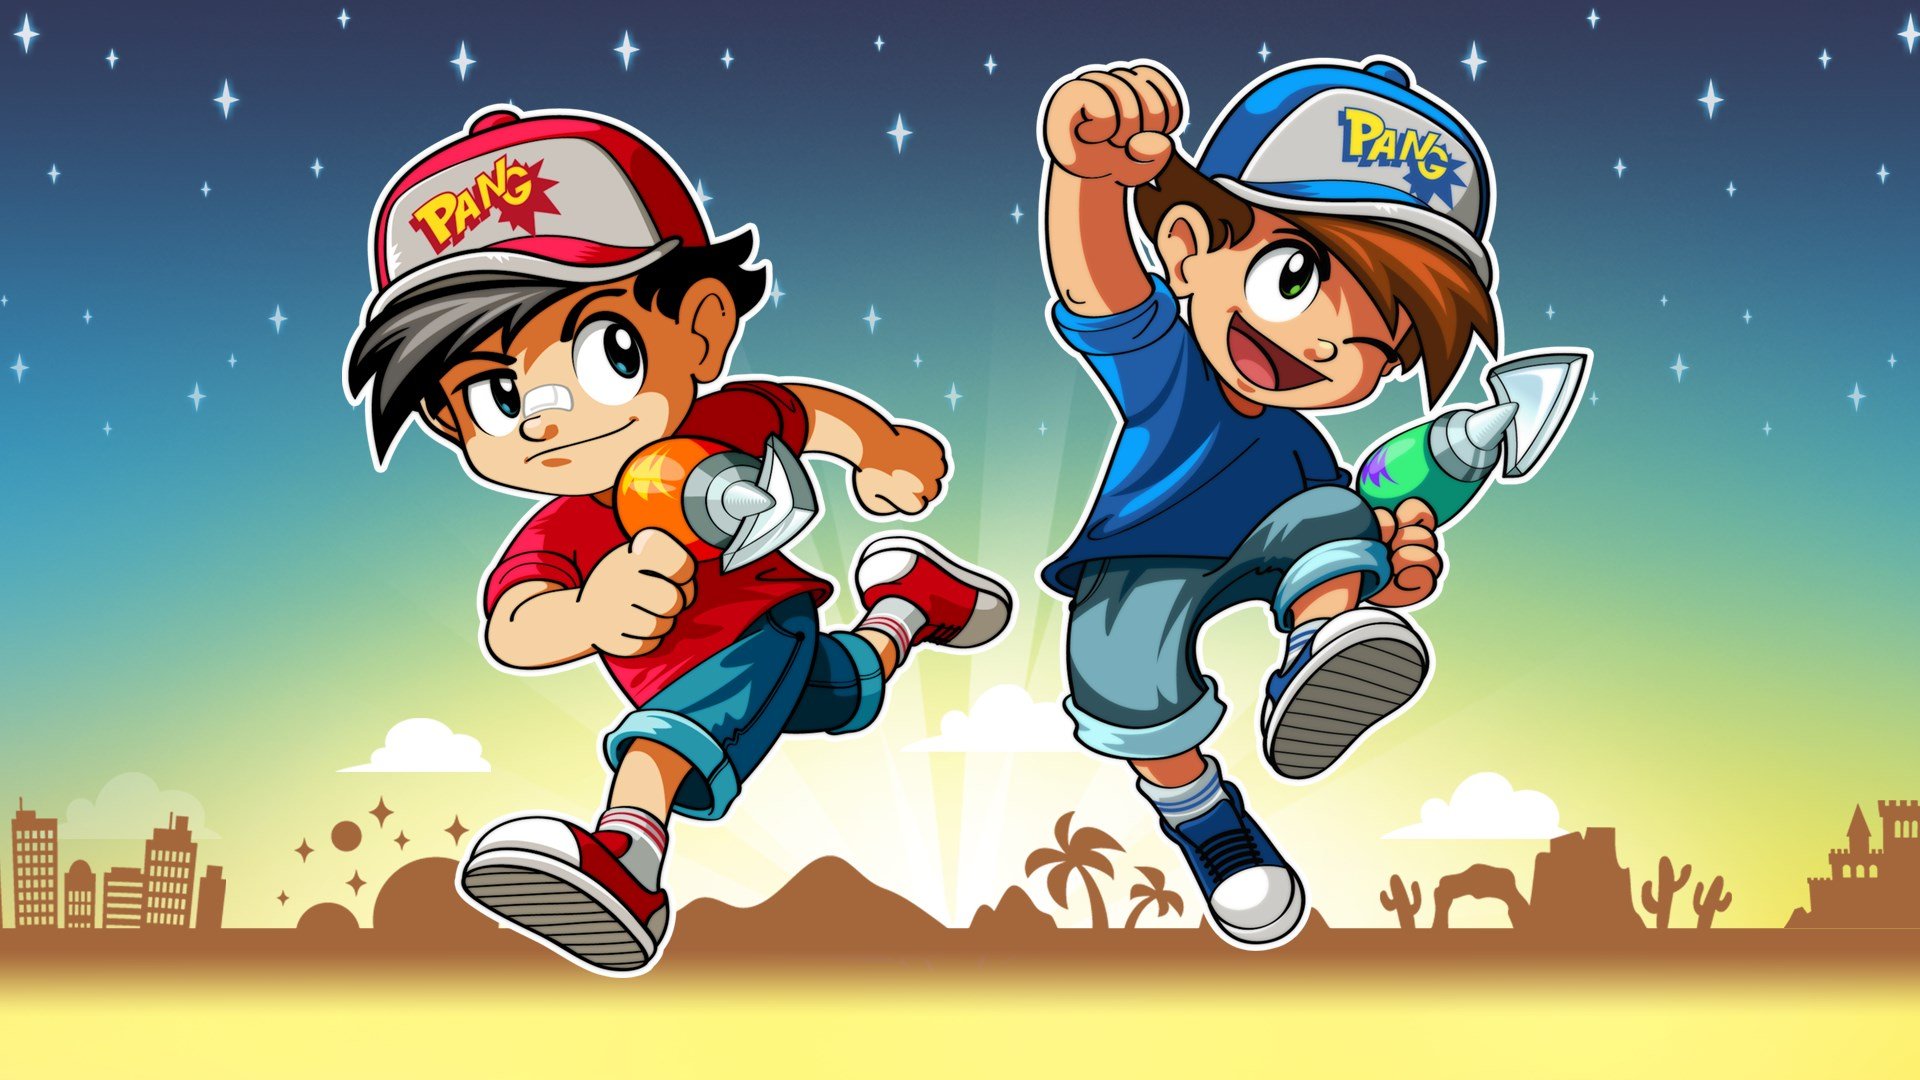 Pang Adventures cover image